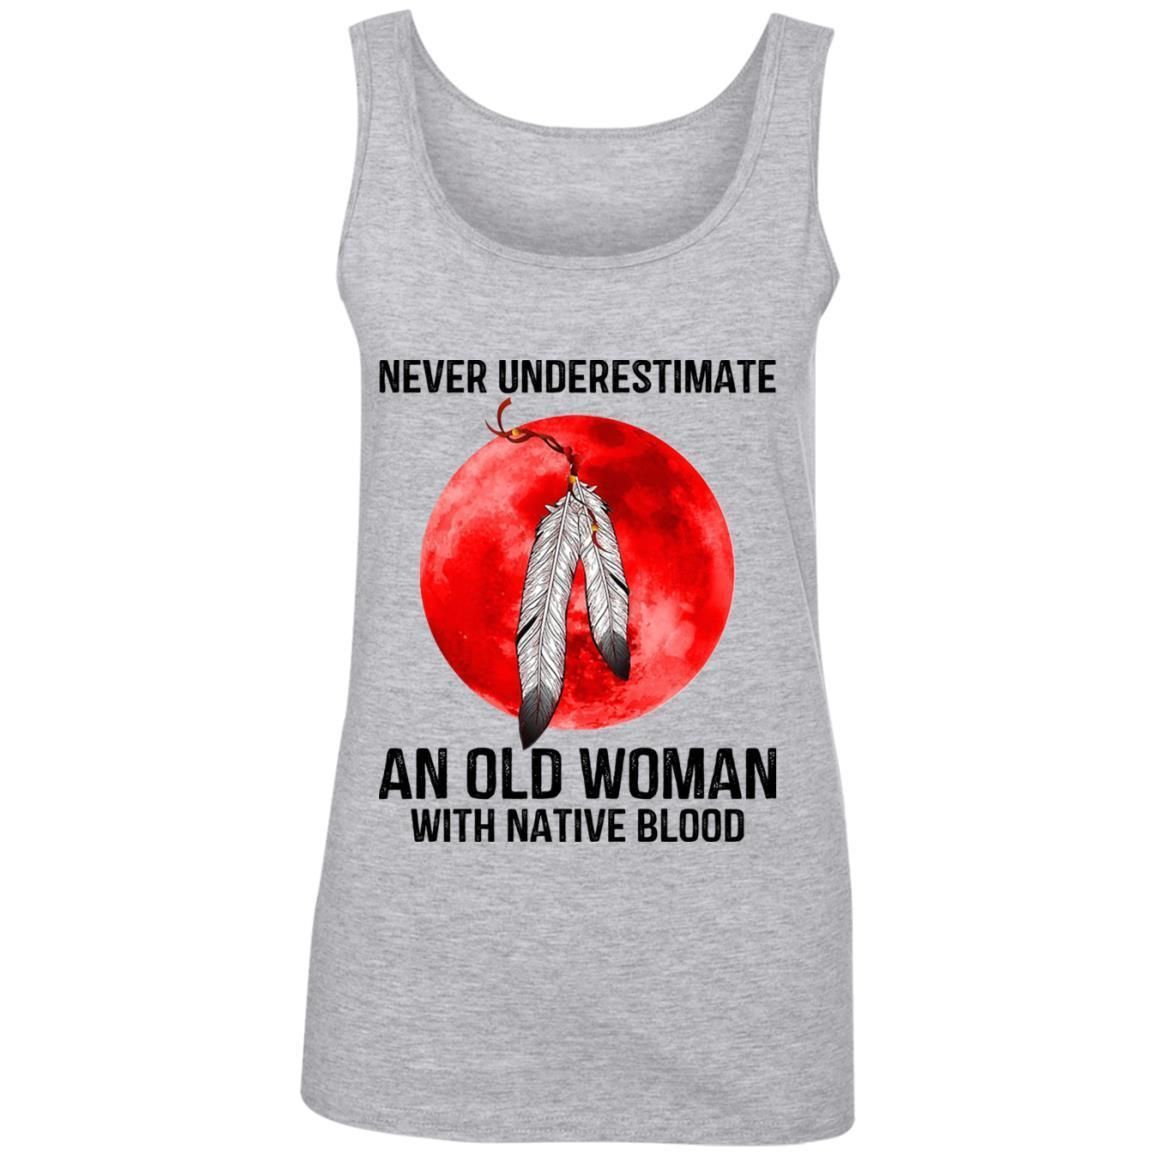 Never underestimate an old woman with native blood shirts